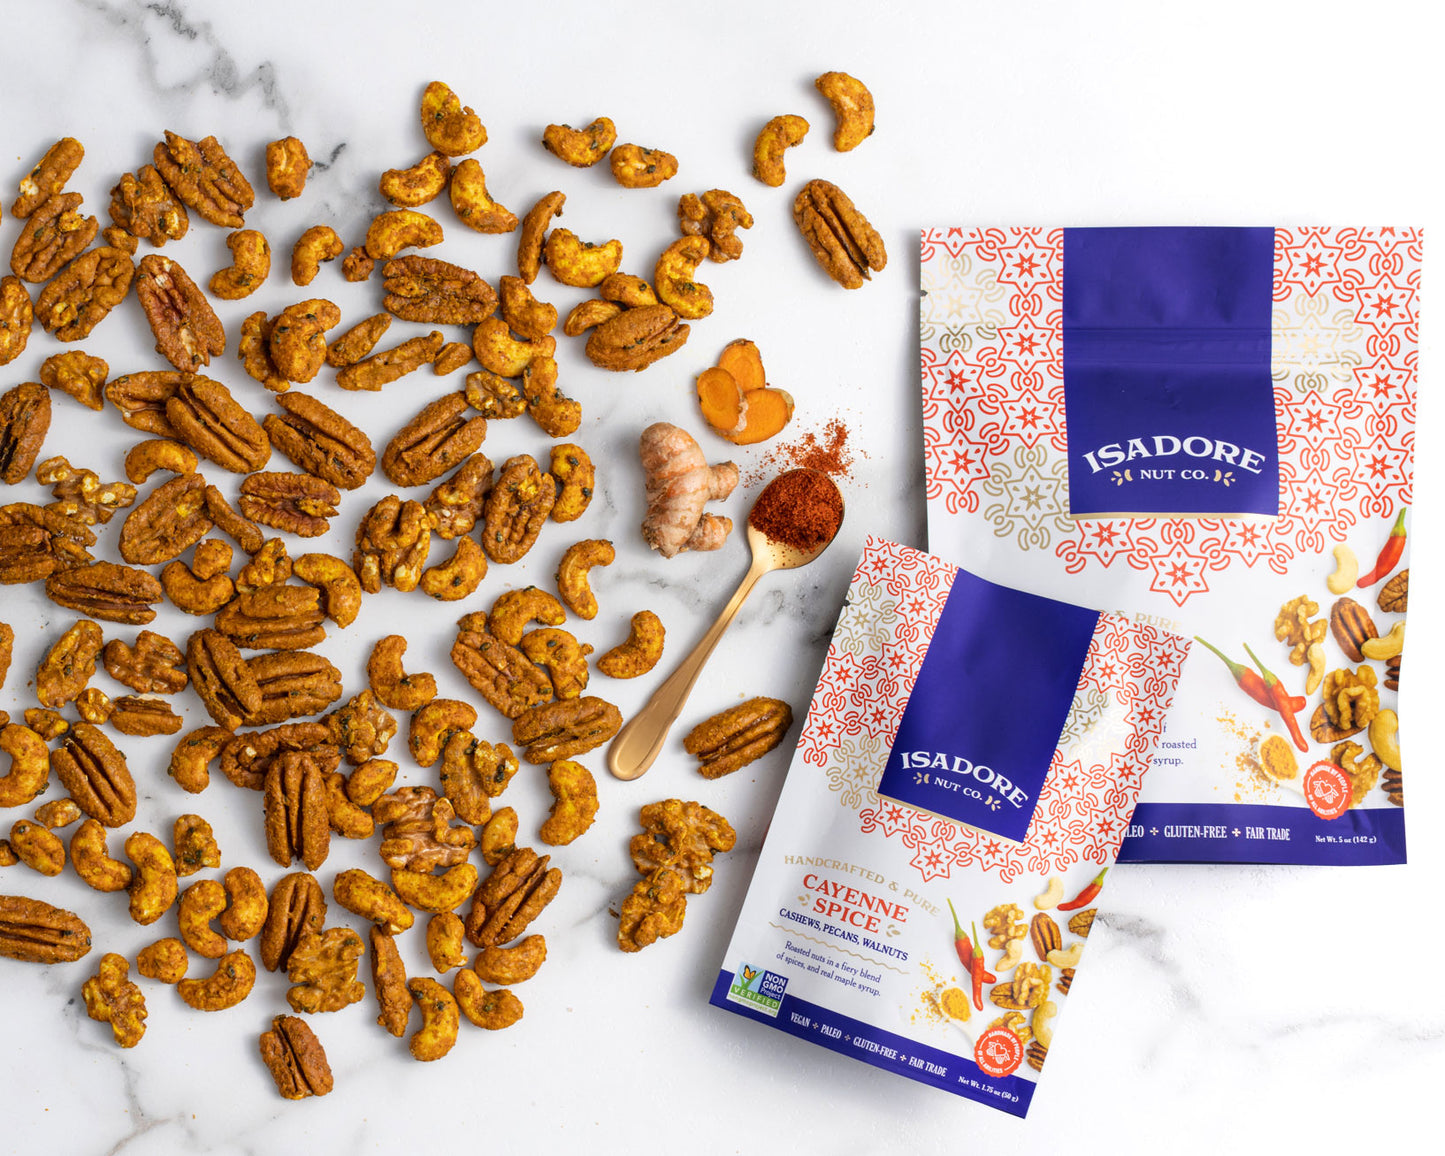 
                  
                    CAYENNE SPICE- Cashews, Pecans, Walnuts Roasted nuts in a fiery blend of spices, and real maple syrup. This spicy trio of seasoned nuts is high in antioxidants thanks to turmeric and black sesame seed. Pair it with a salad or an effervescent to heighten the heat.
                  
                